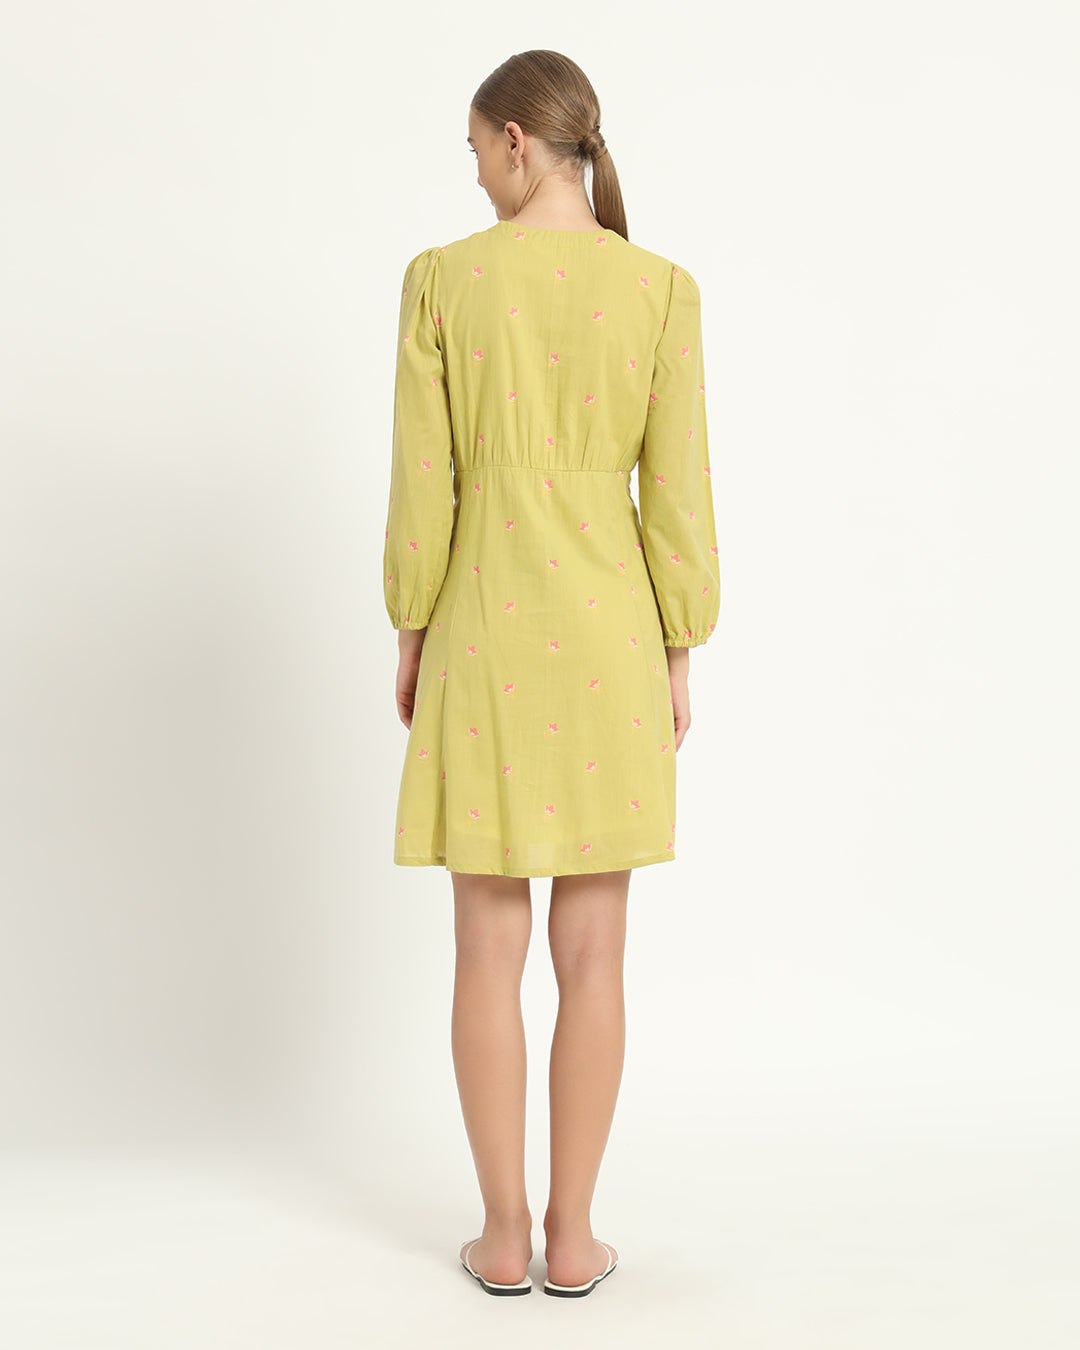 The Dafni Lime Cosmos Cotton Dress